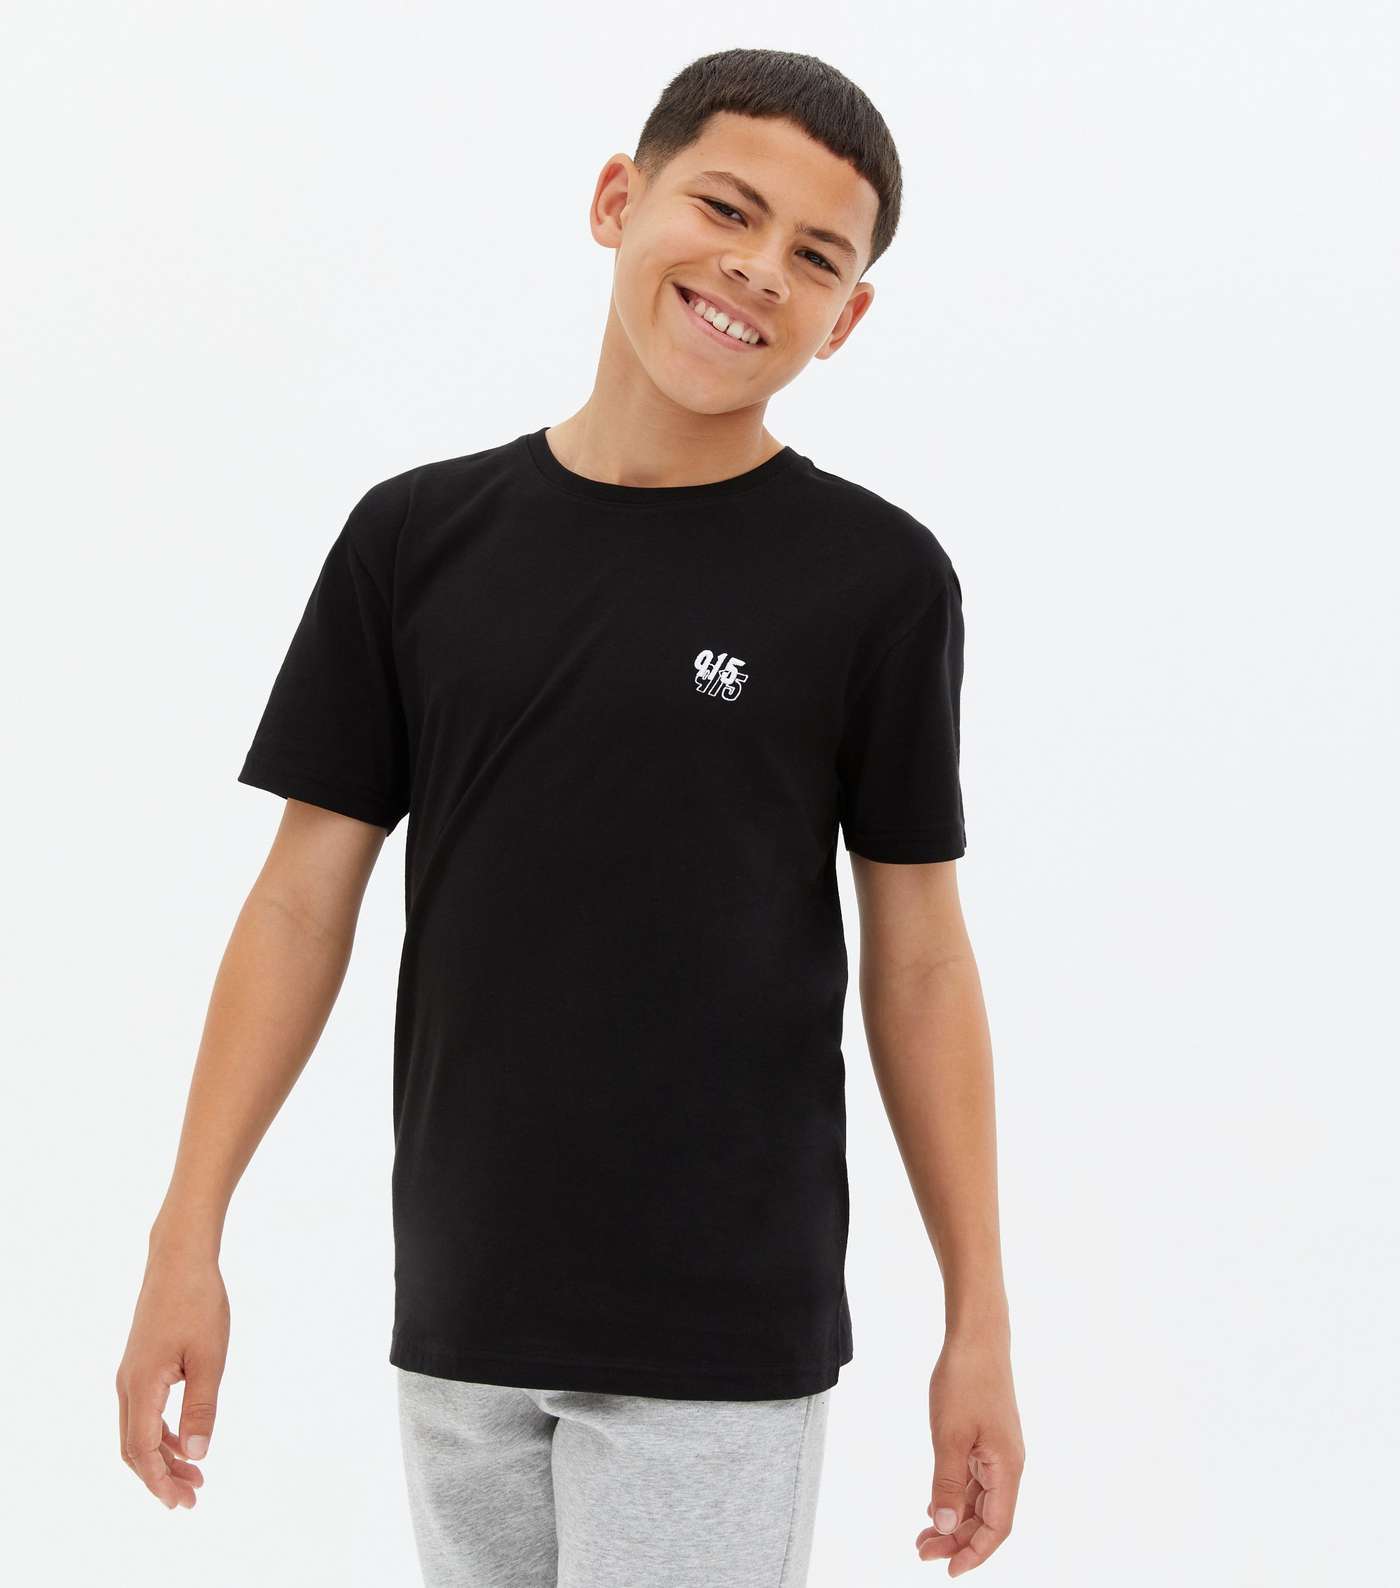 Boys Black 915 Embroidered T-Shirt Image 3